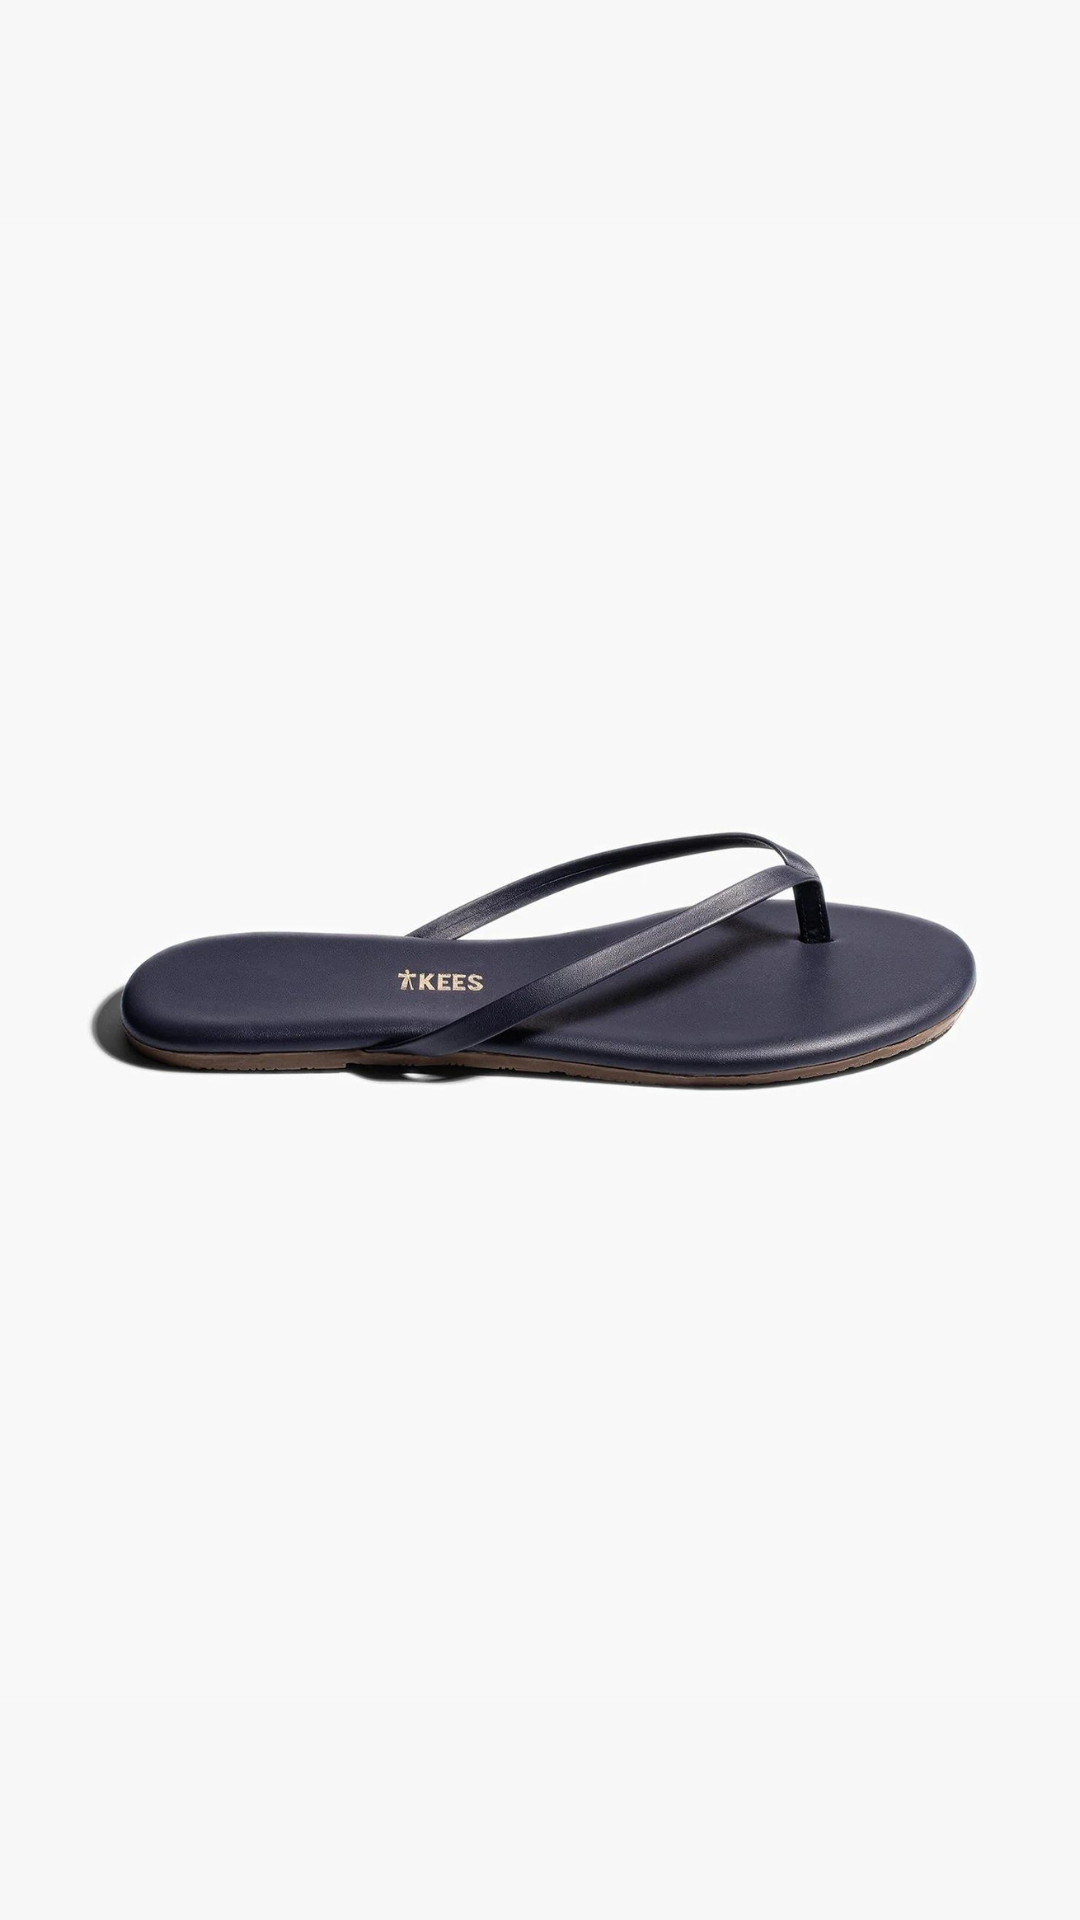 Tkees Lily Liner Sandal in Twilight